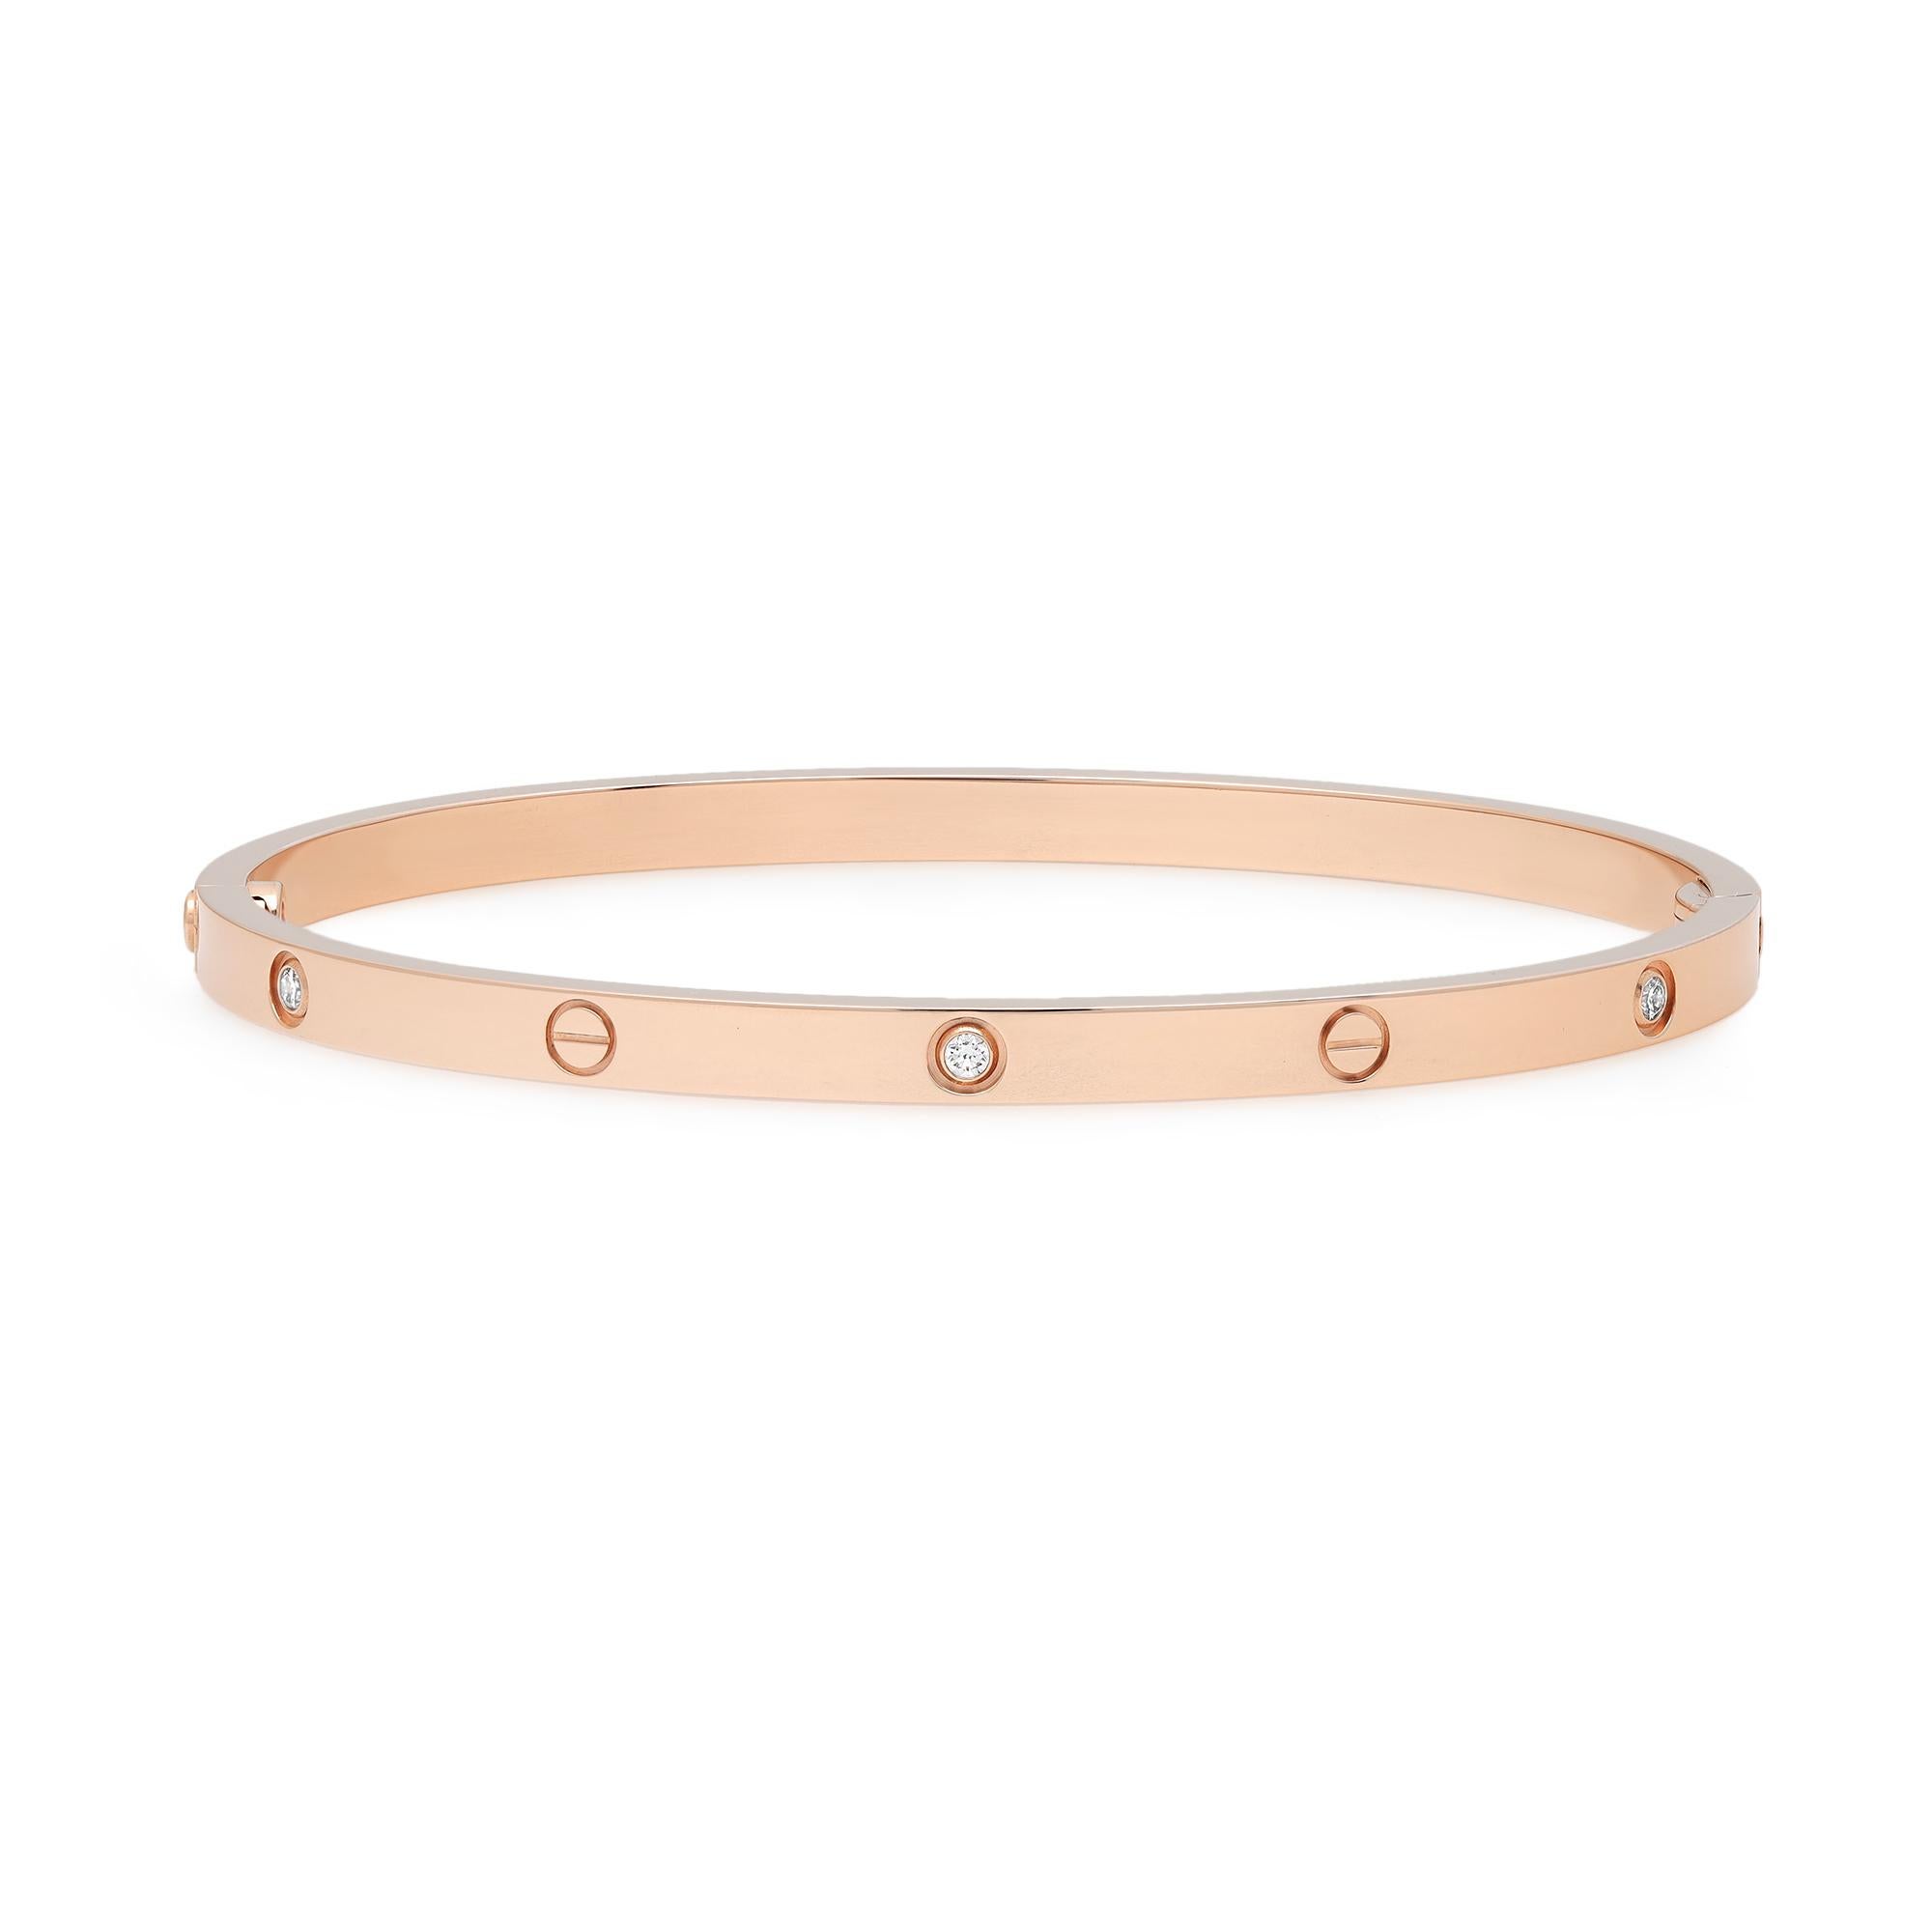 Cartier LOVE bracelet small model. Crafted in 18k rose gold, set with 6 round brilliant cut diamonds weighing 0.15 carat. A close fitting, oval bracelet composed of two rigid arcs which are worn on the wrist and removed using a specific screwdriver.